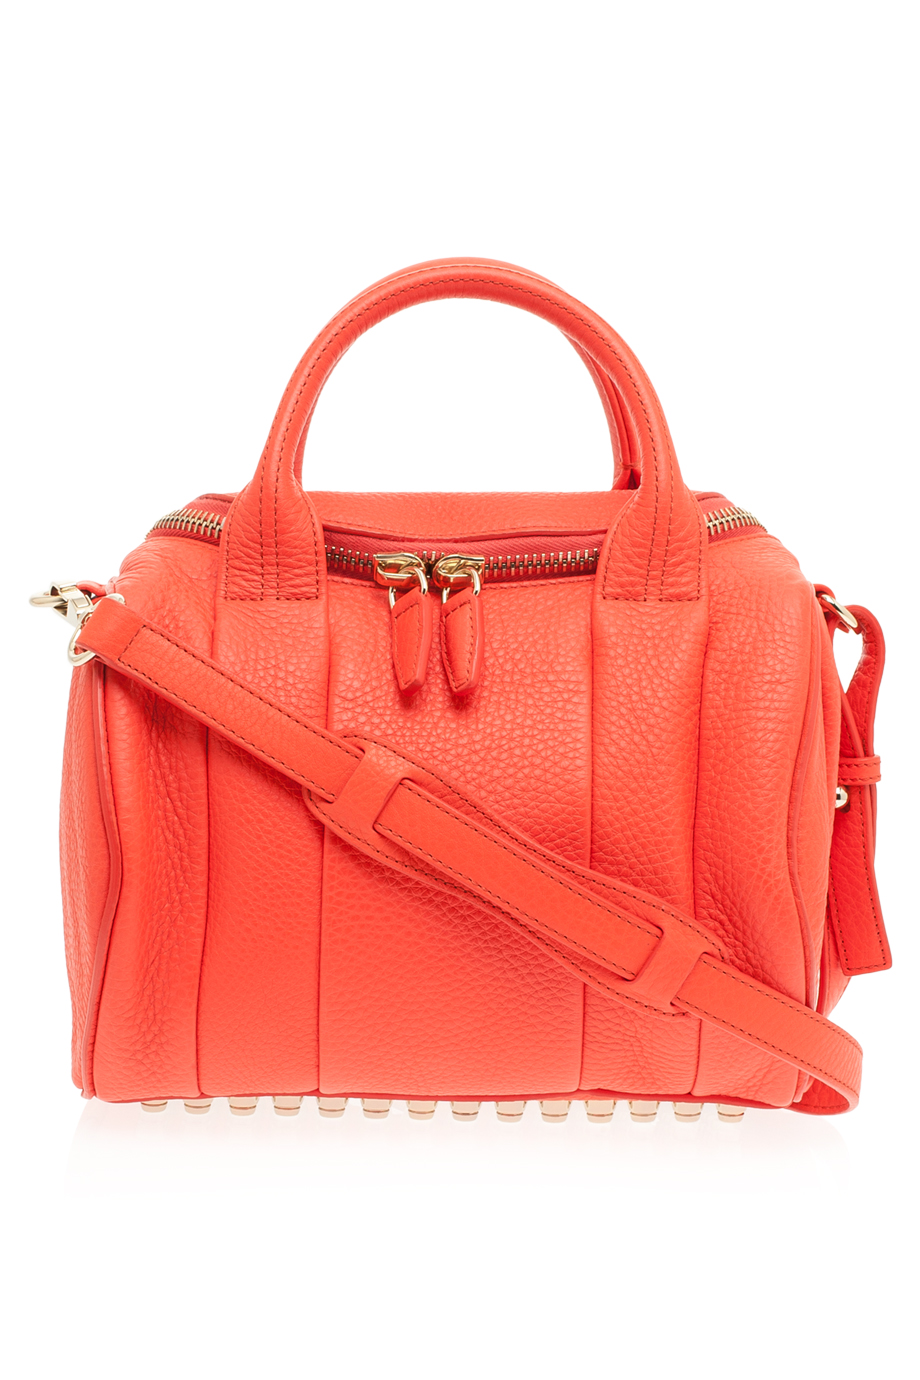 Lyst - Alexander Wang Pebbled Leather Bag in Red